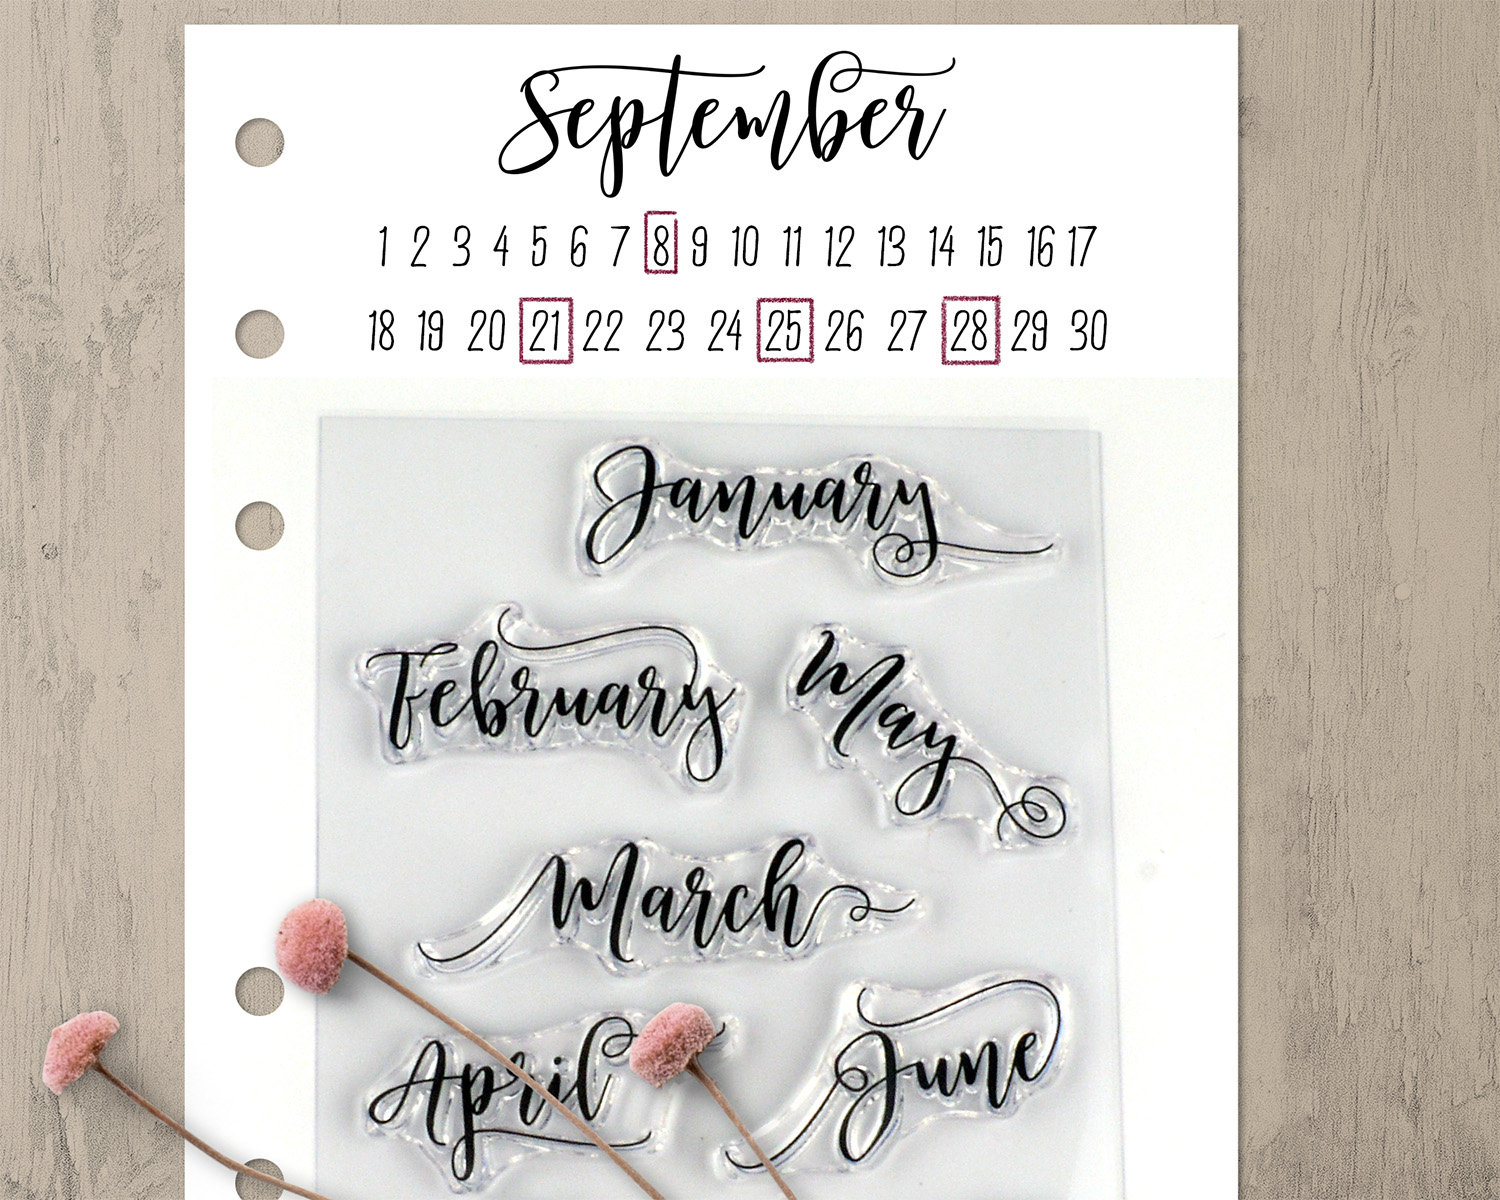 Weekday Bullet Journal Stamps, Clear Planner Stamps, Days of the